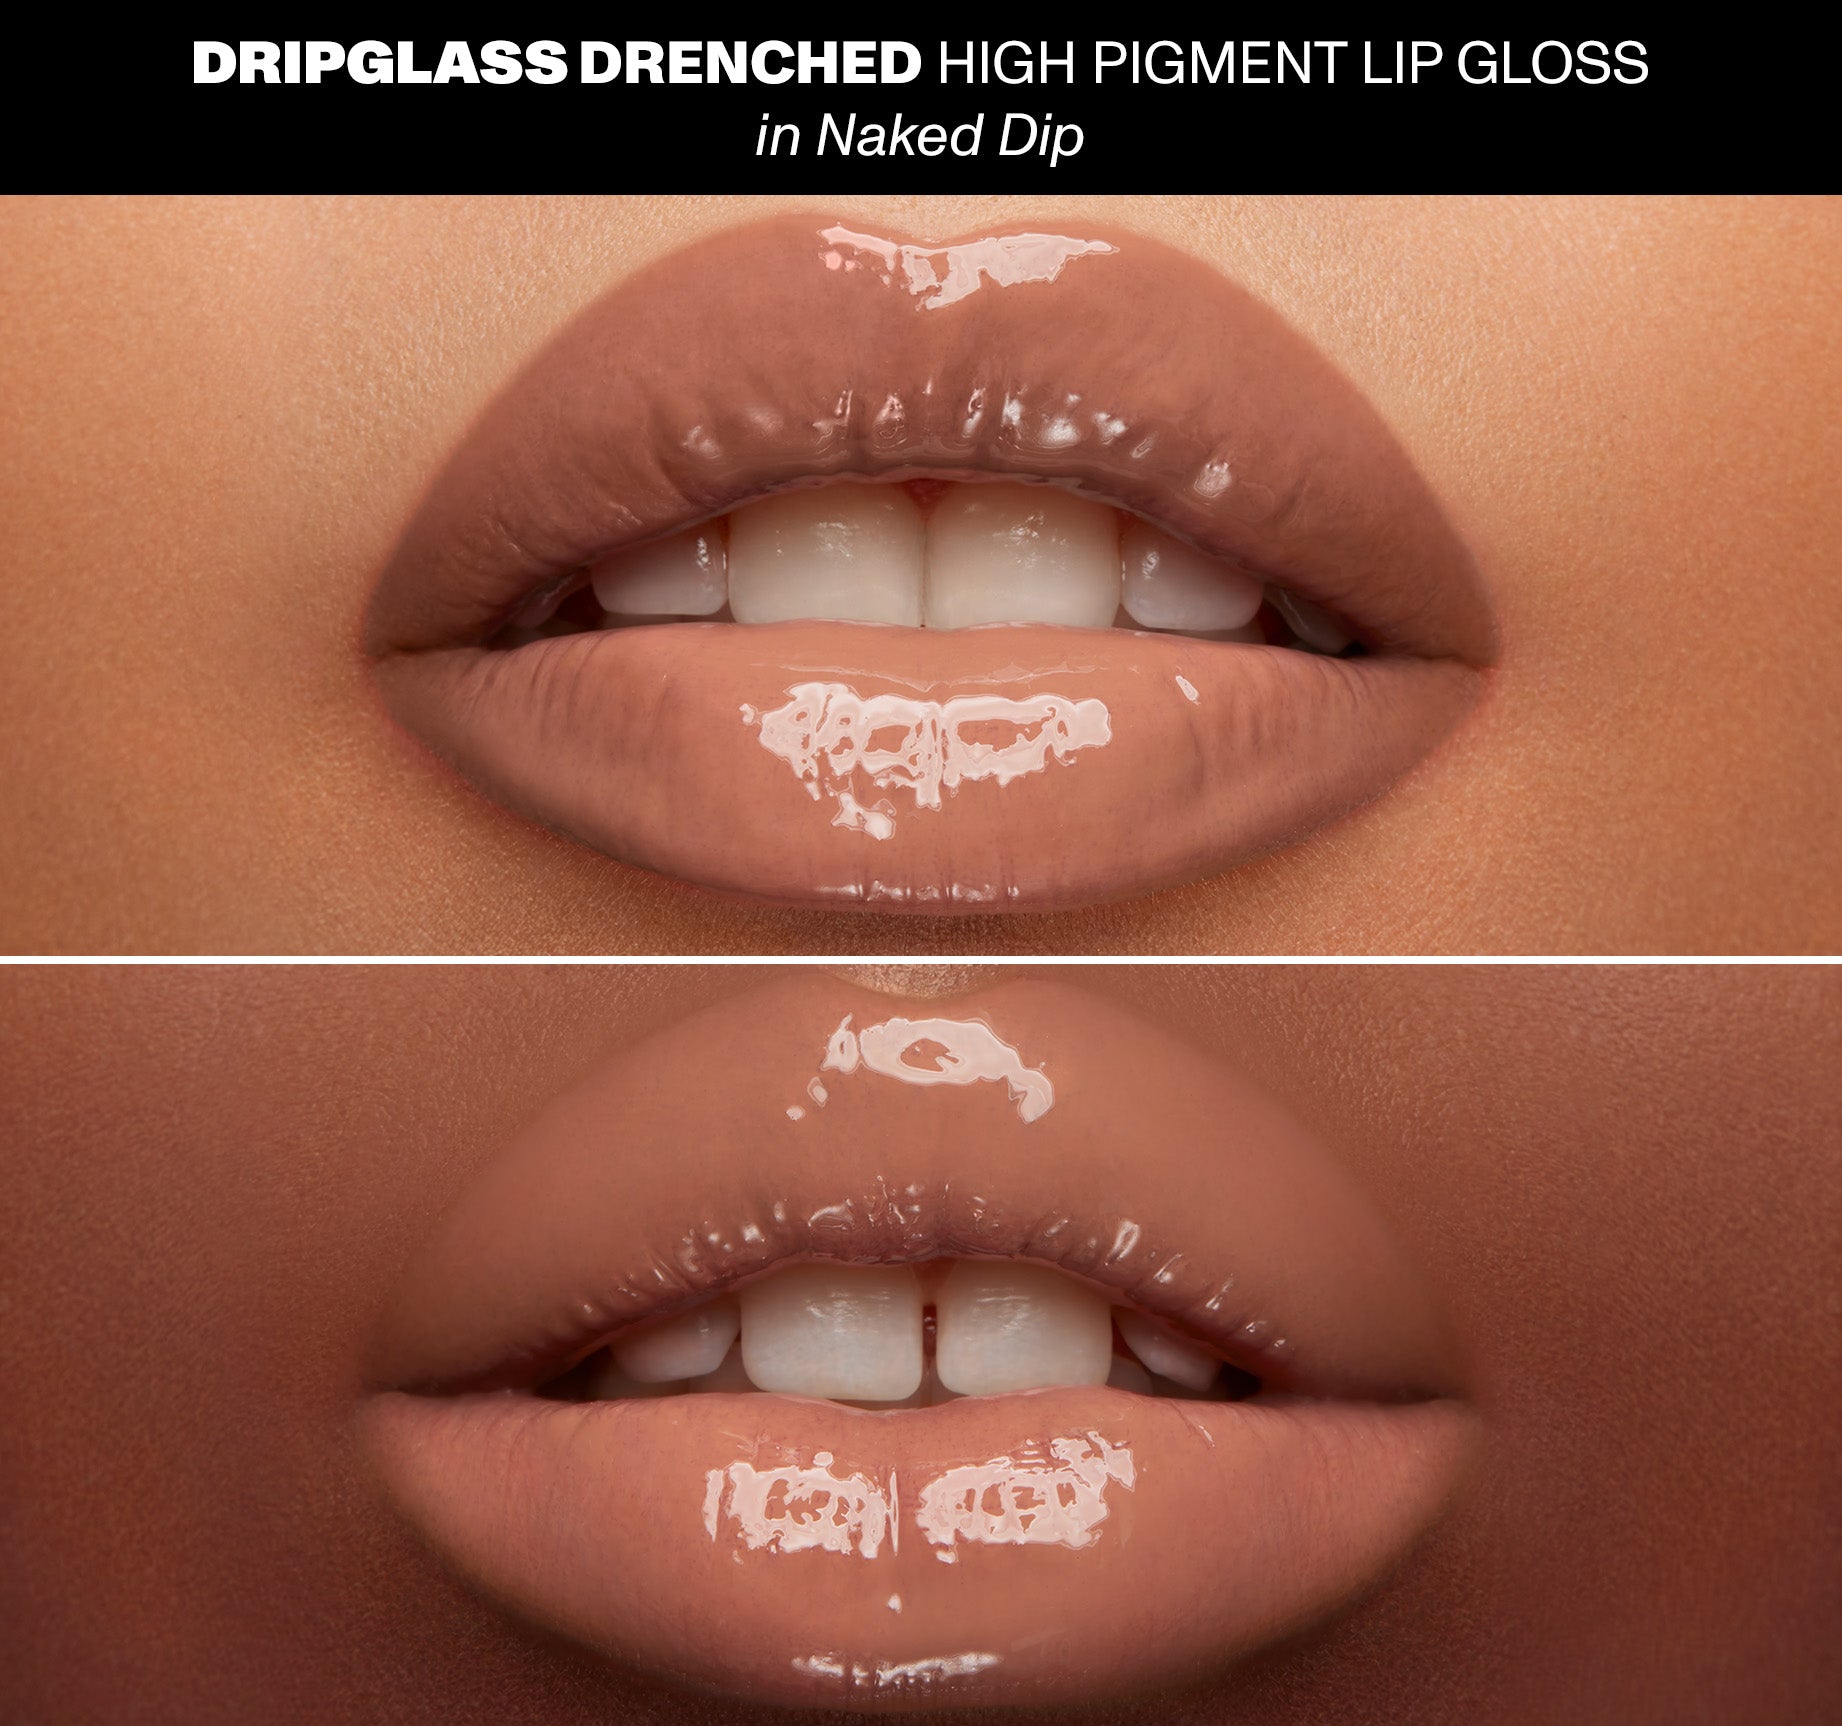 Dripglass Drenched High Pigment Lip Gloss - Naked Dip - Image 3